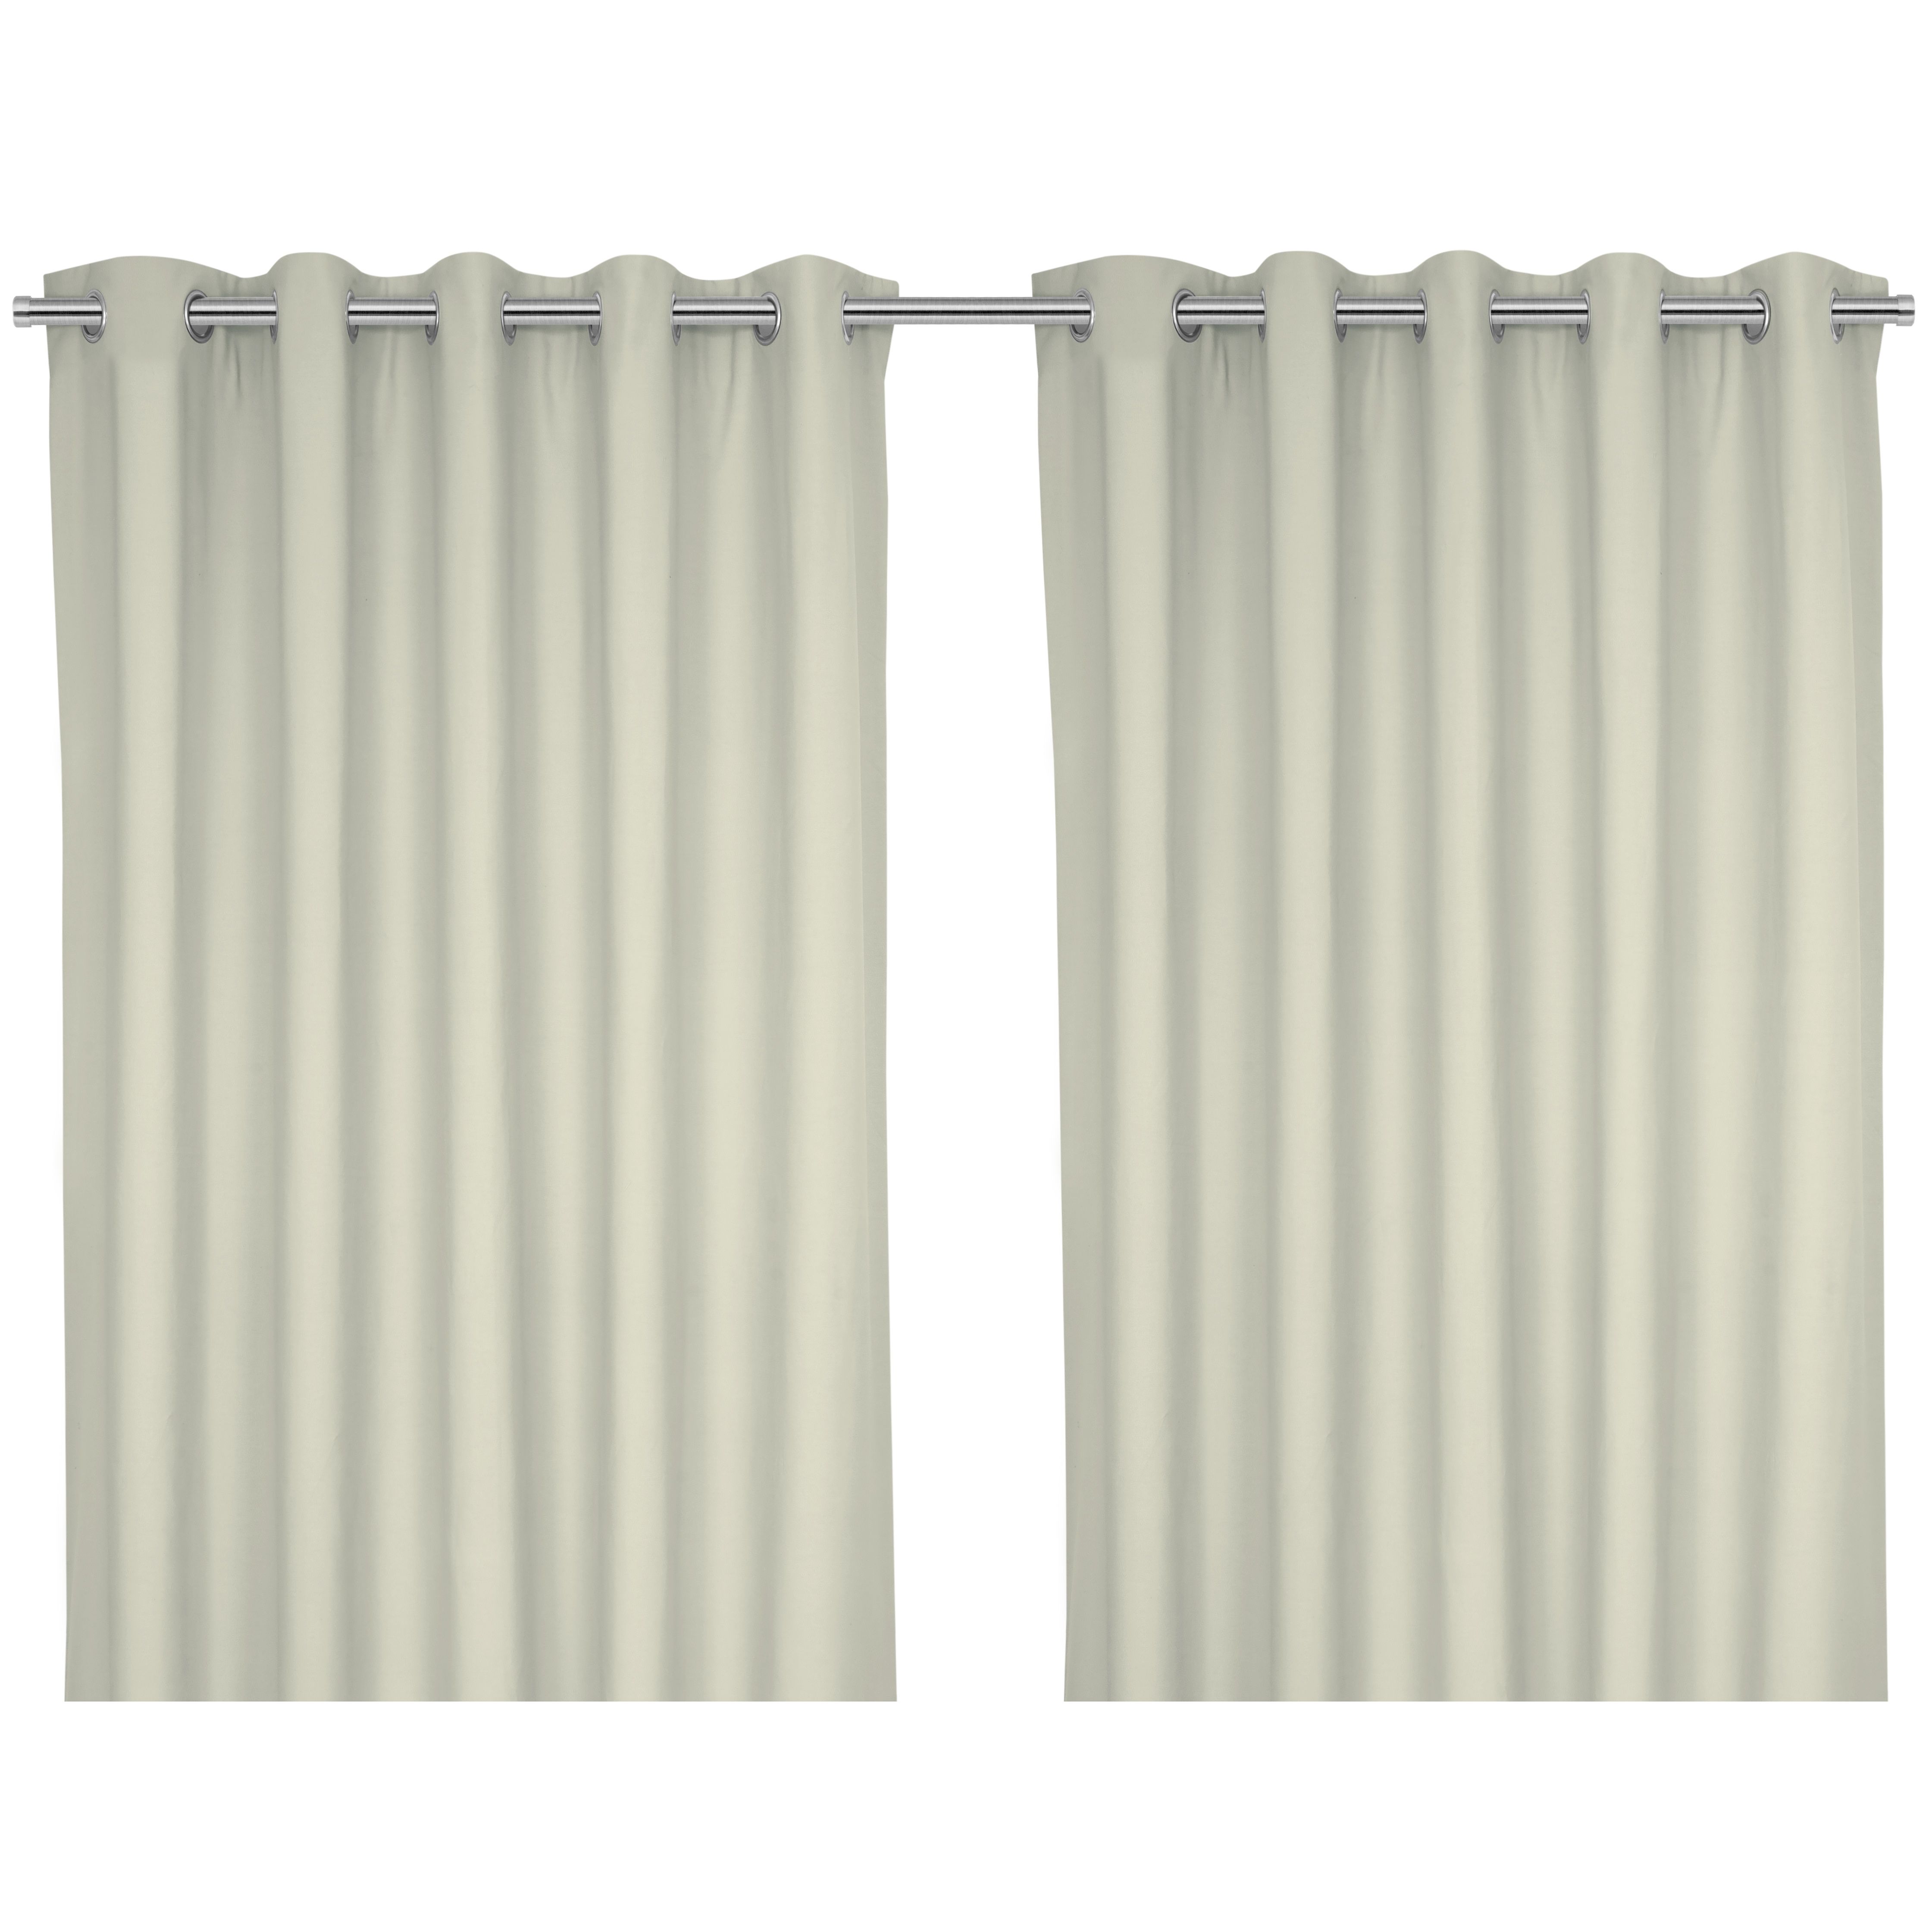 Hiva Beige Solid dyed Lined Eyelet Curtain (W)228cm (L)228cm, Pair